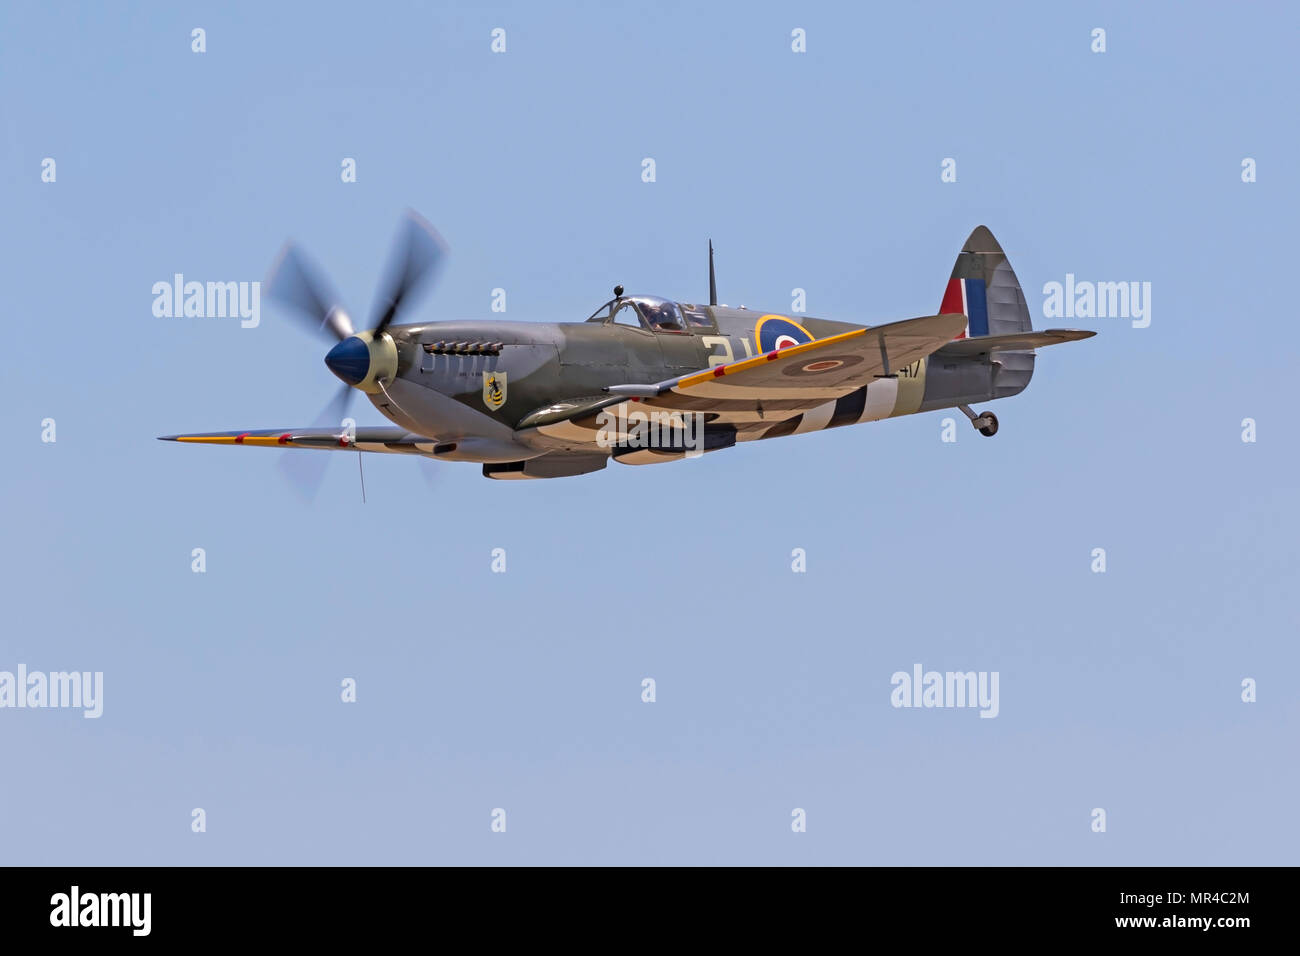 Airplane WWII Spitfire flying at airshow Stock Photo